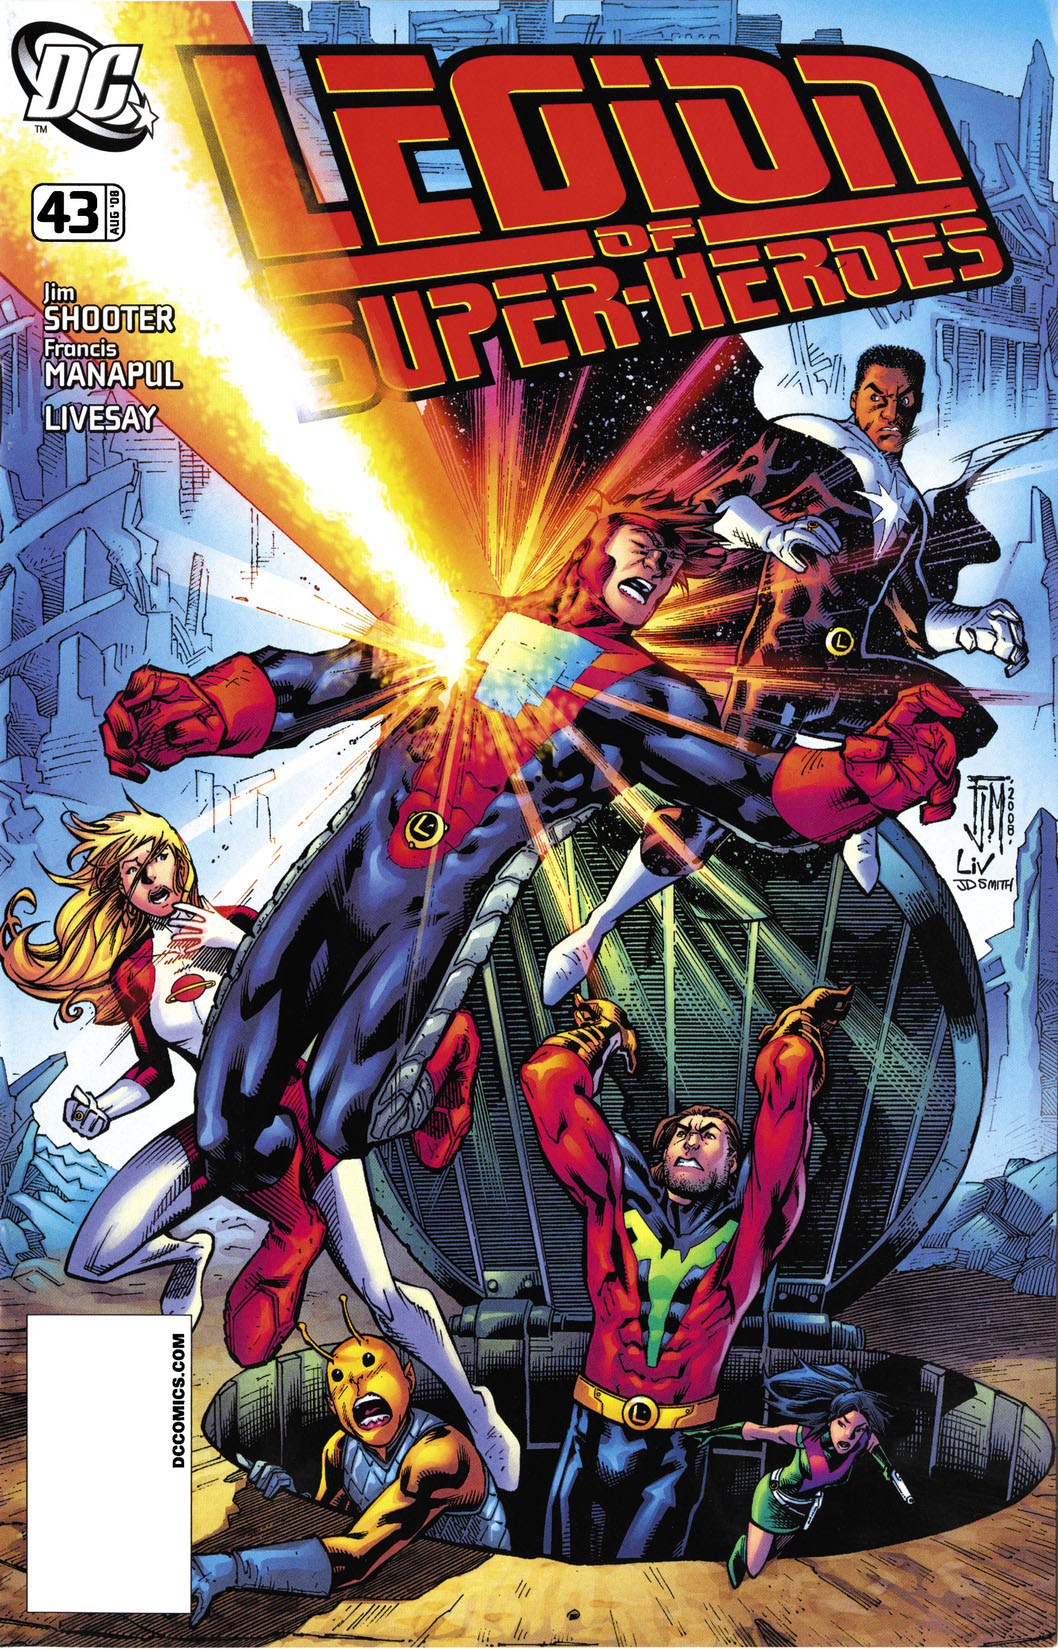 Legion of Super-Heroes (2007-) #43 preview images